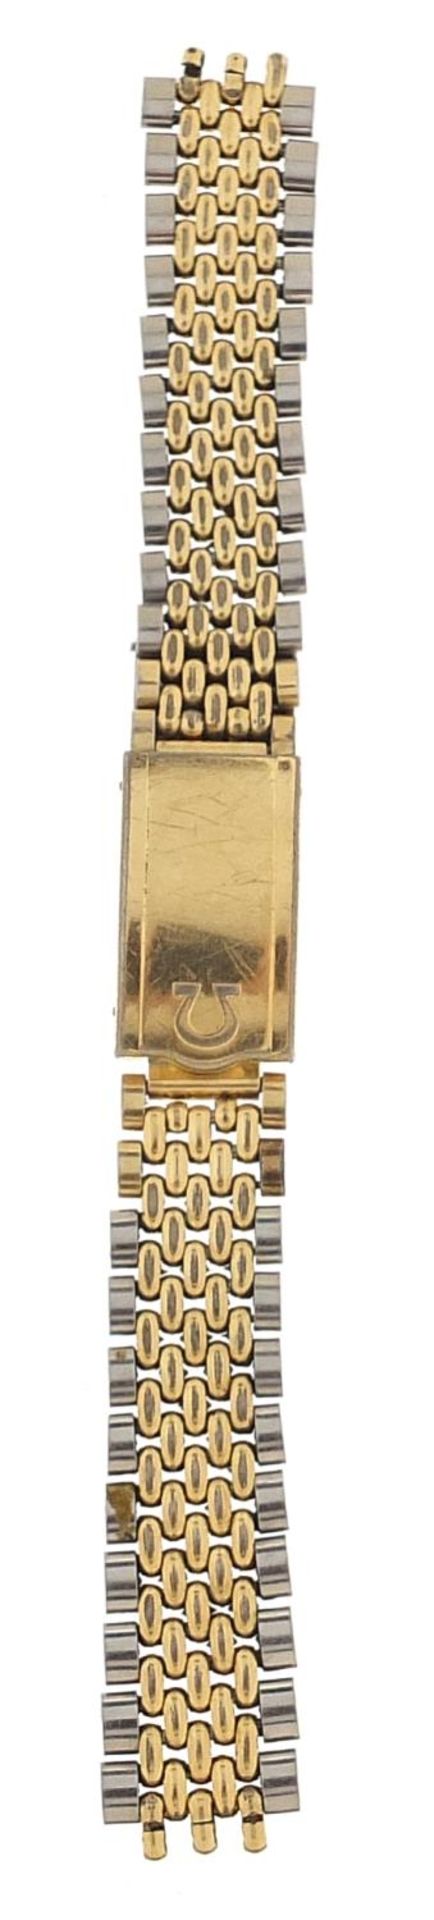 Omega, gentlemen's wristwatch strap no 12 numbered 1036 - Image 2 of 3